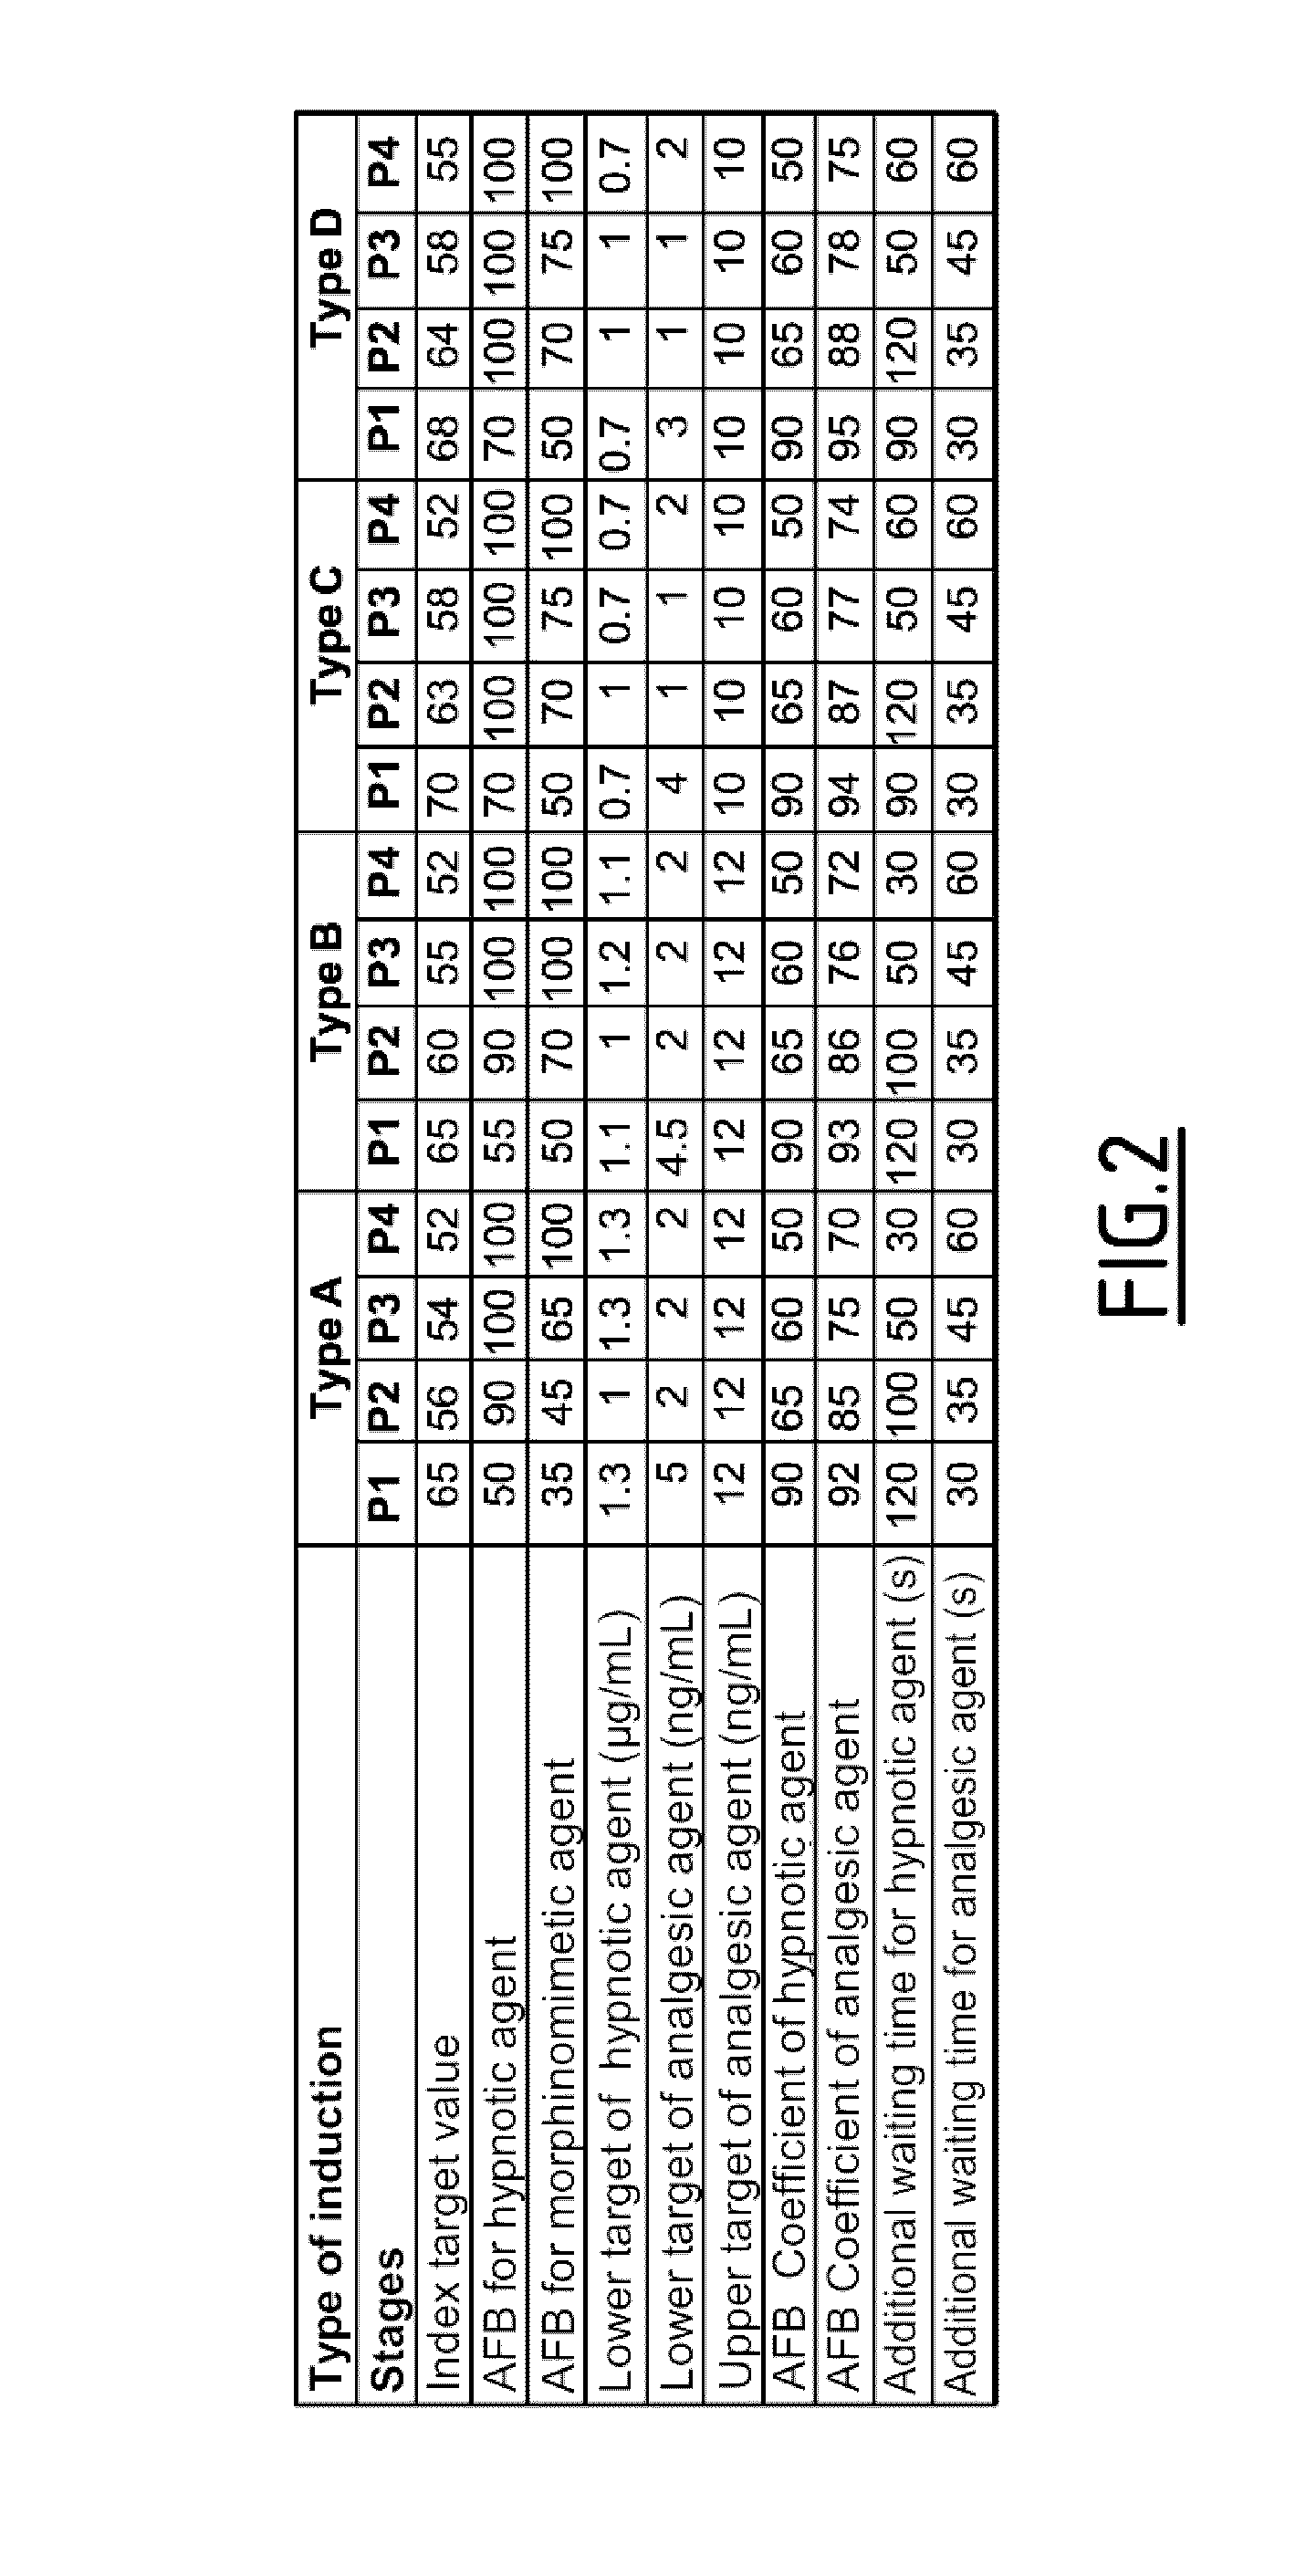 System for controlling means for injection of anesthetics or sedatives